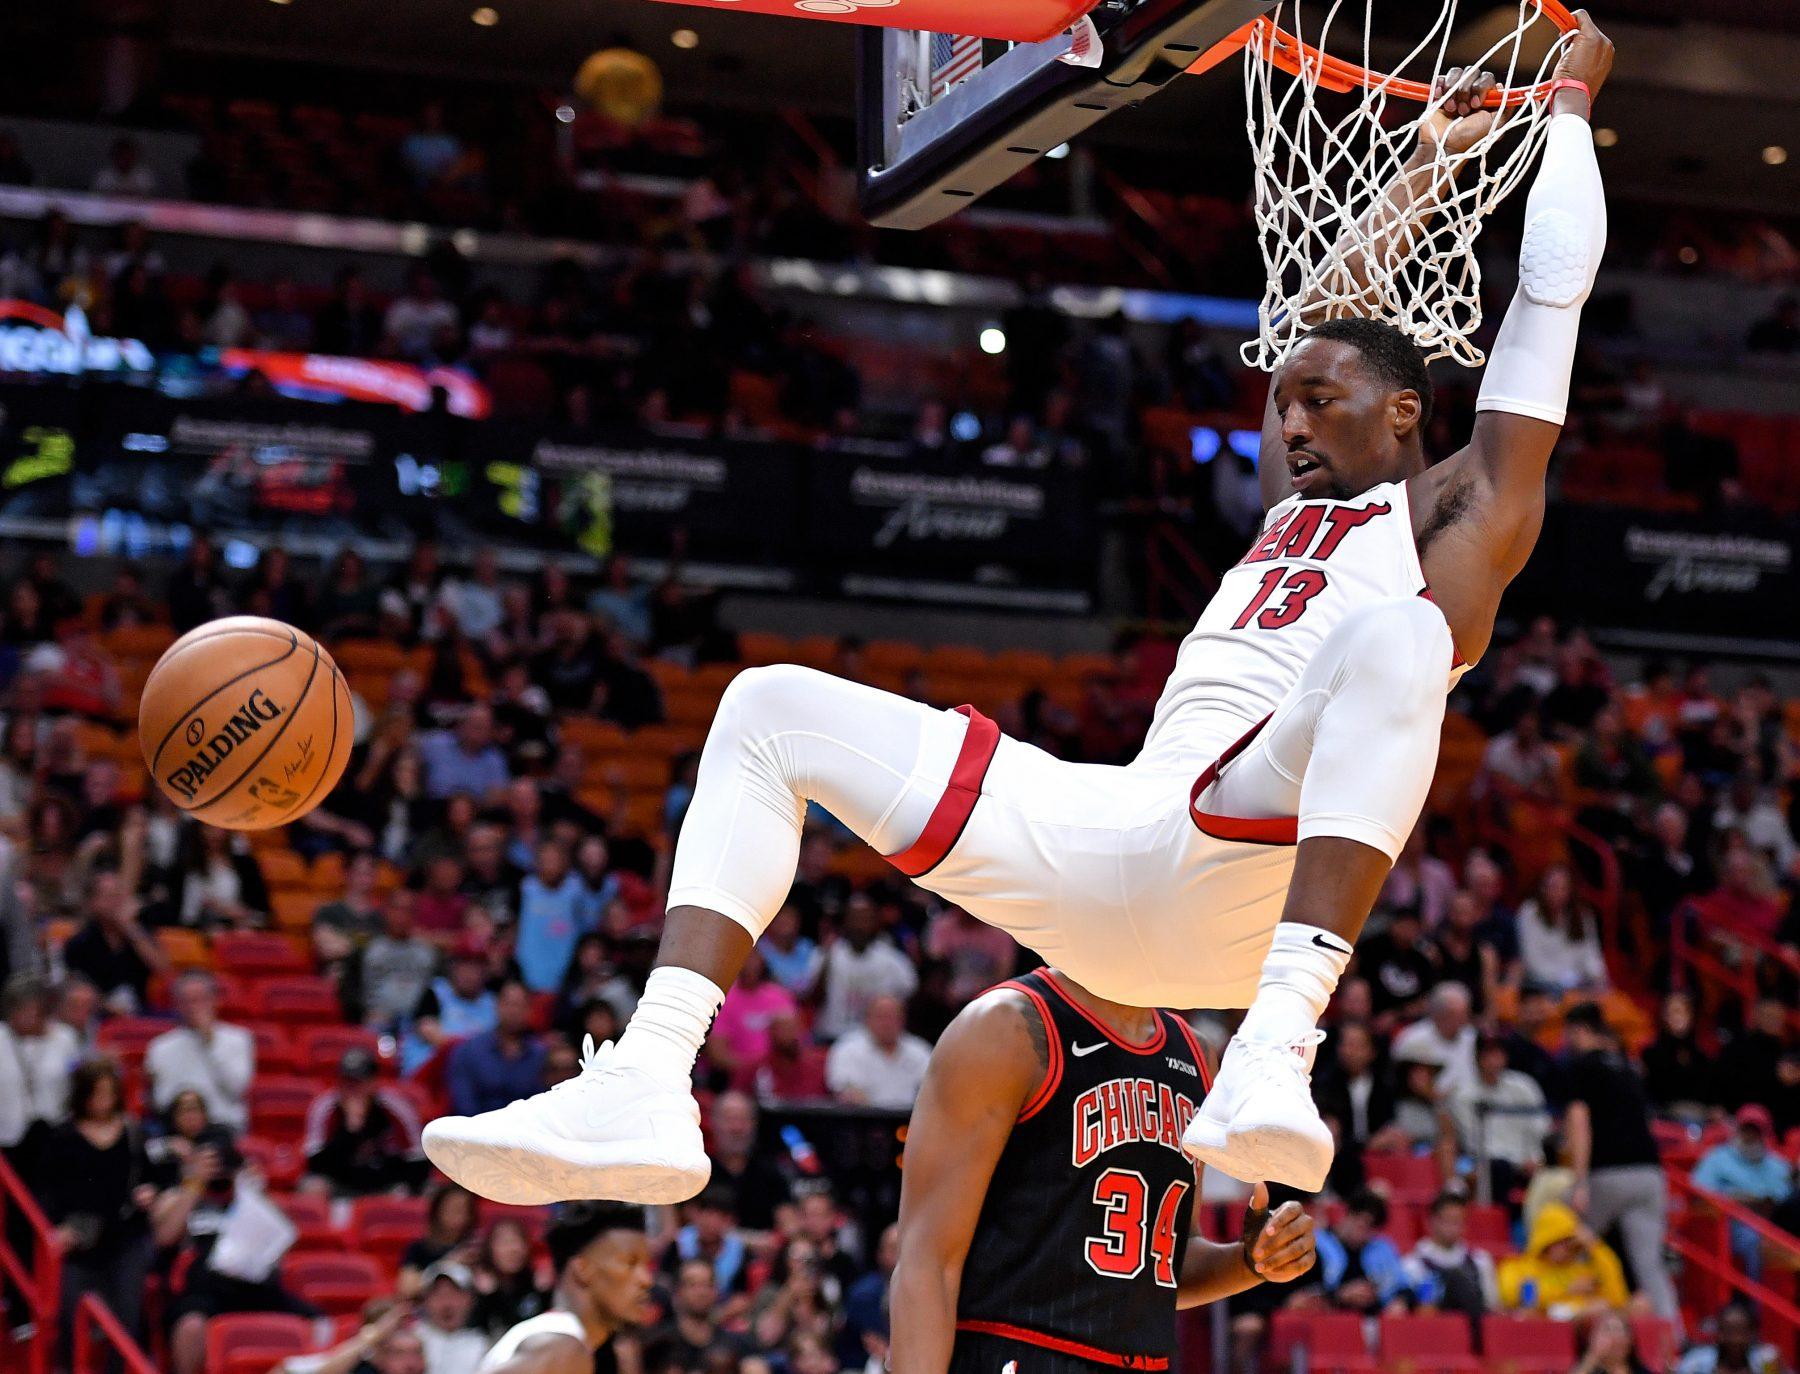 Basketball Forever  Bam Adebayo WITH 31 PTS 10 REB 6 AST  4 STLS TO  CARRY Miami Heat TO THE GAME 3 WIN WITHOUT Jimmy Butler IN THE SECOND HALF    Facebook